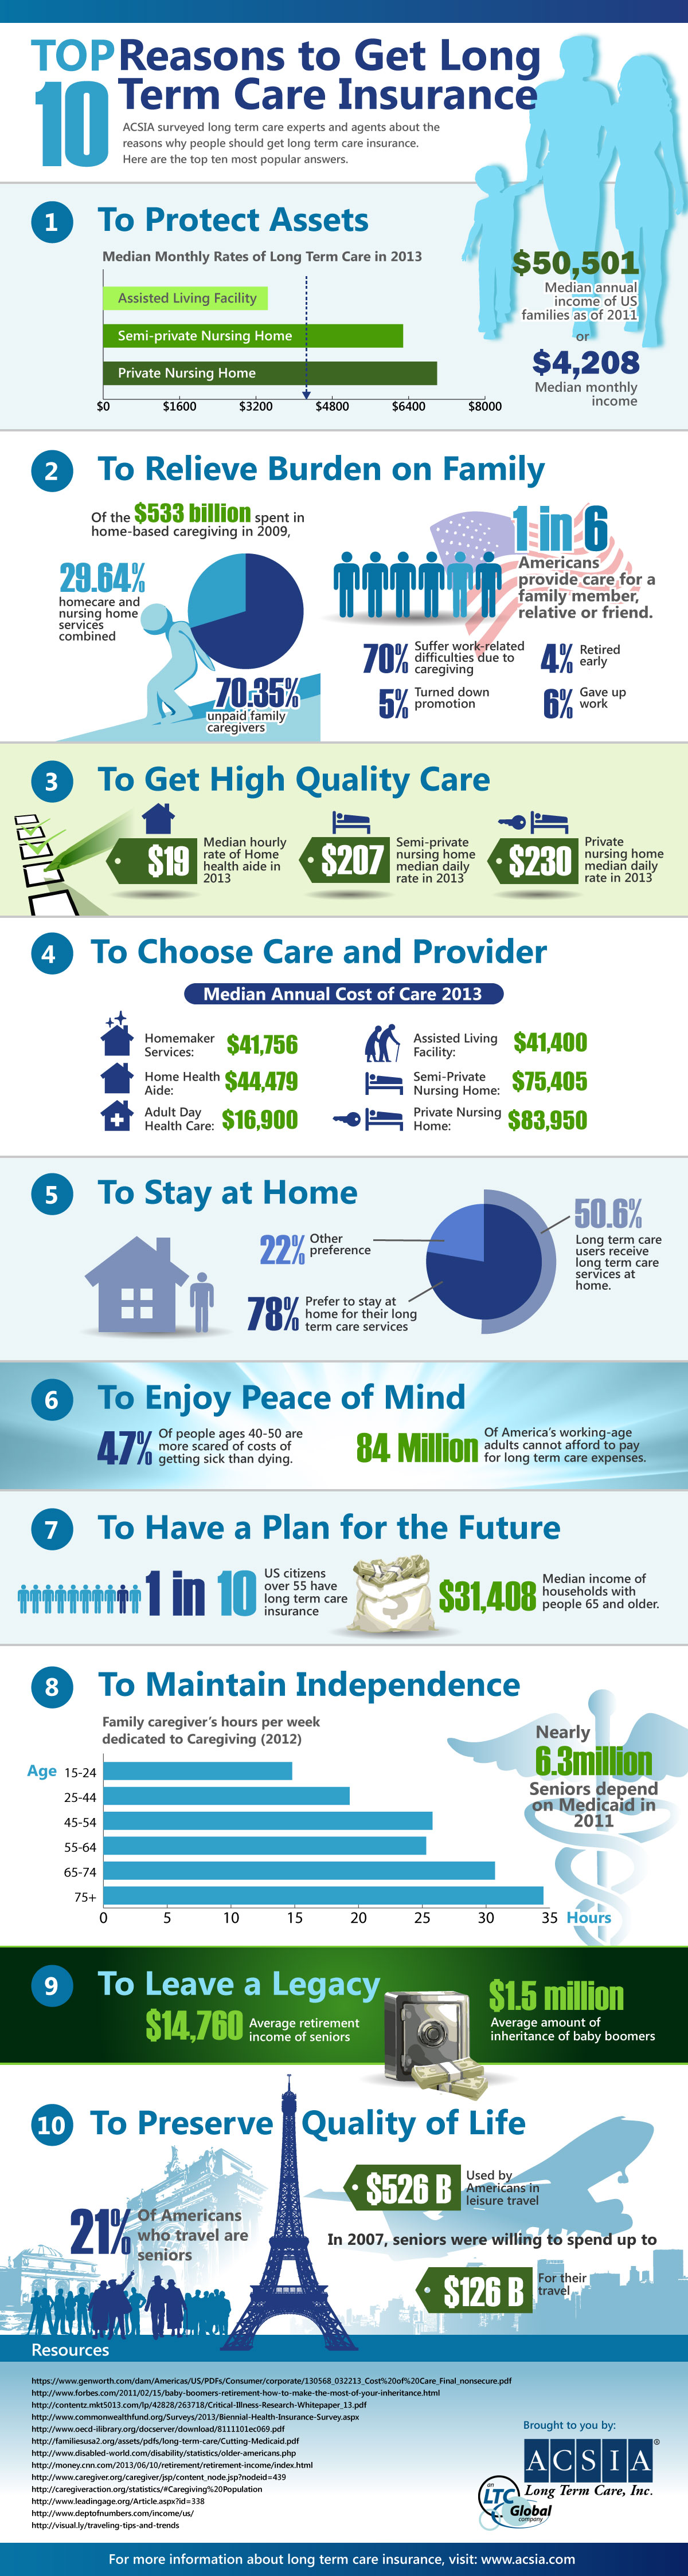 Top-10-Reasons-why-people-need-long-term-care-ACSIA-infographic-full